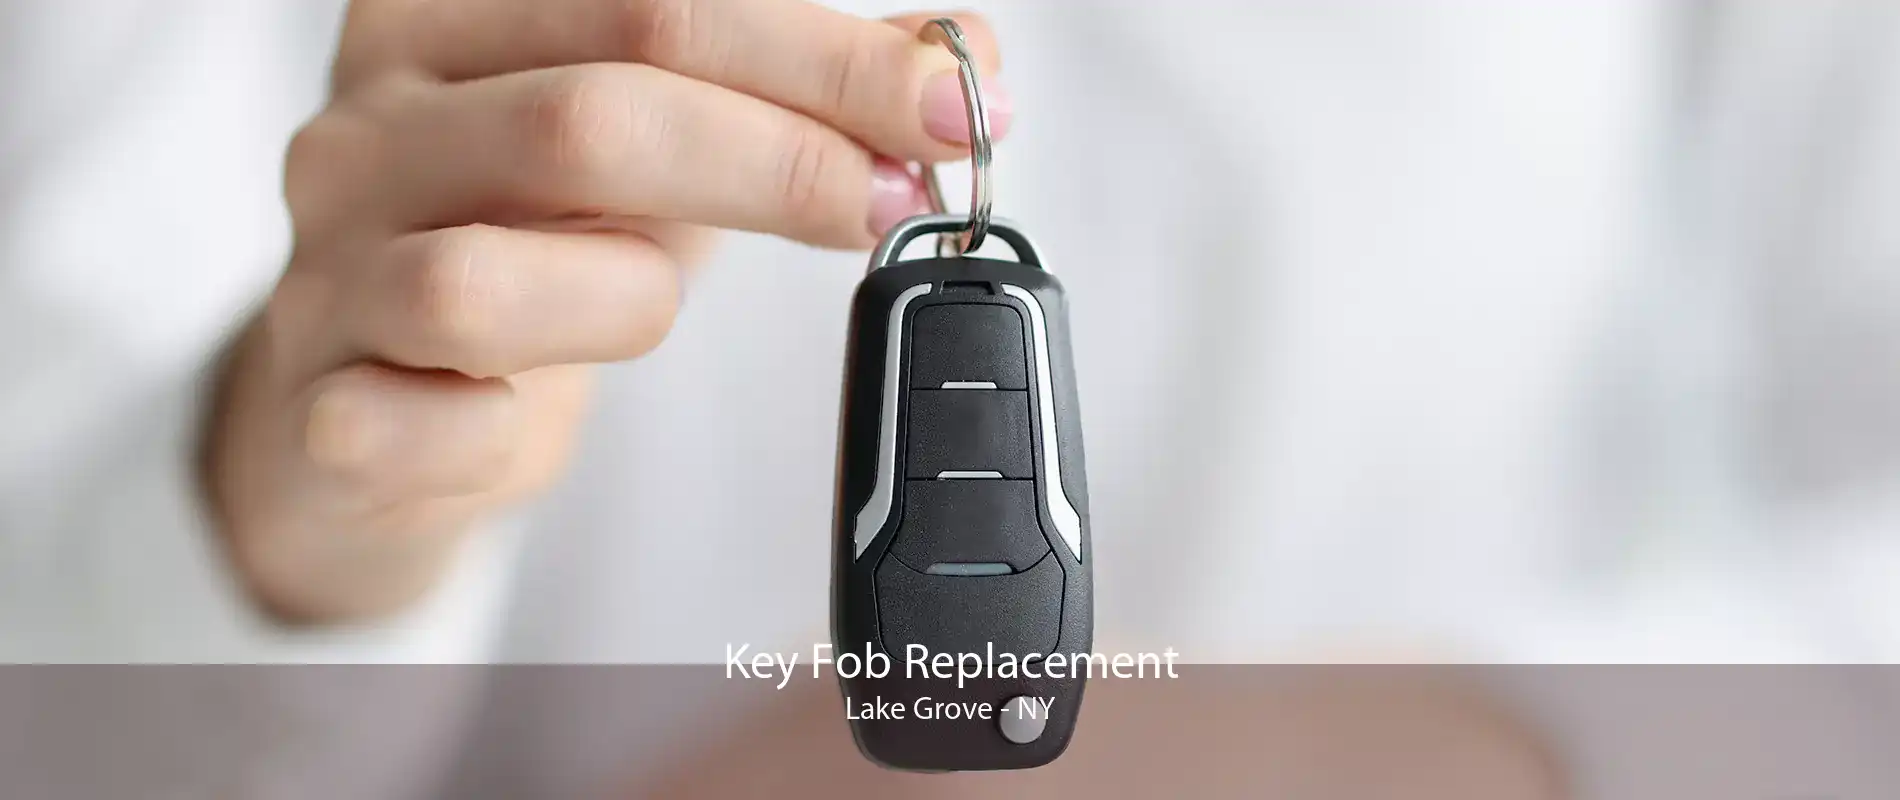 Key Fob Replacement Lake Grove - NY